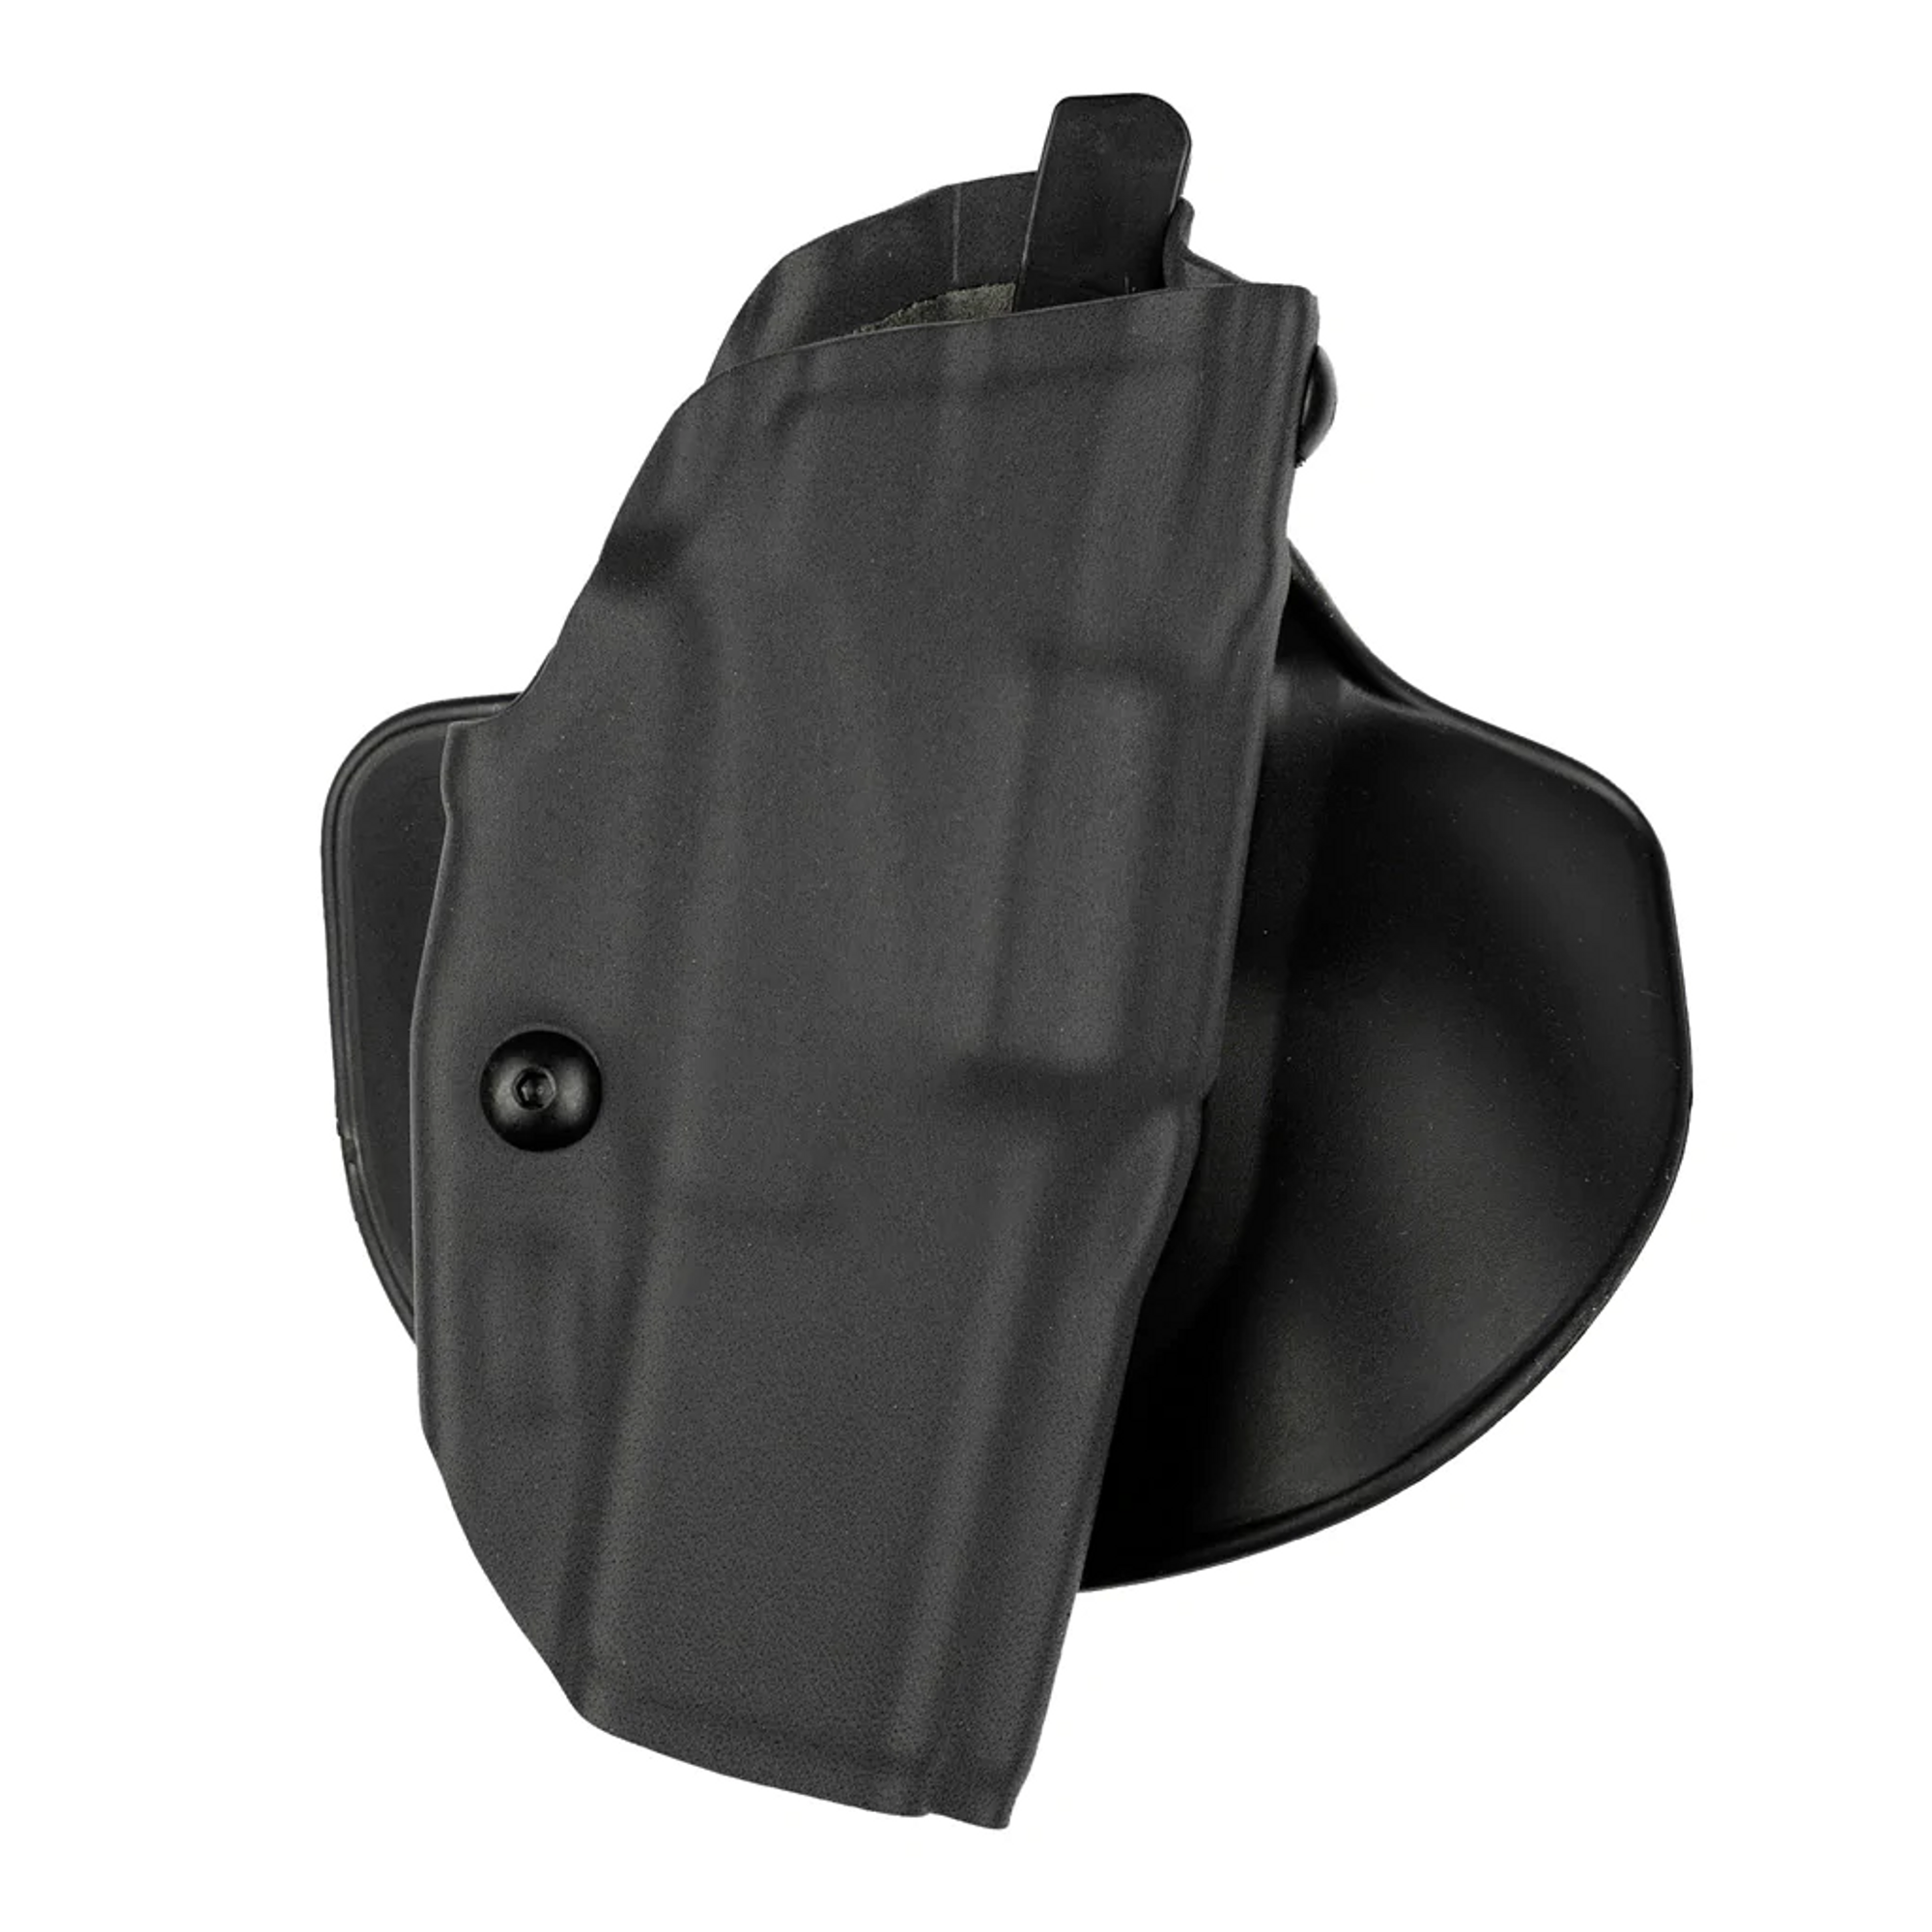 Model 6378 Als Concealment Paddle Holster W/ Belt Loop For Smith & Wesson M&p 9c